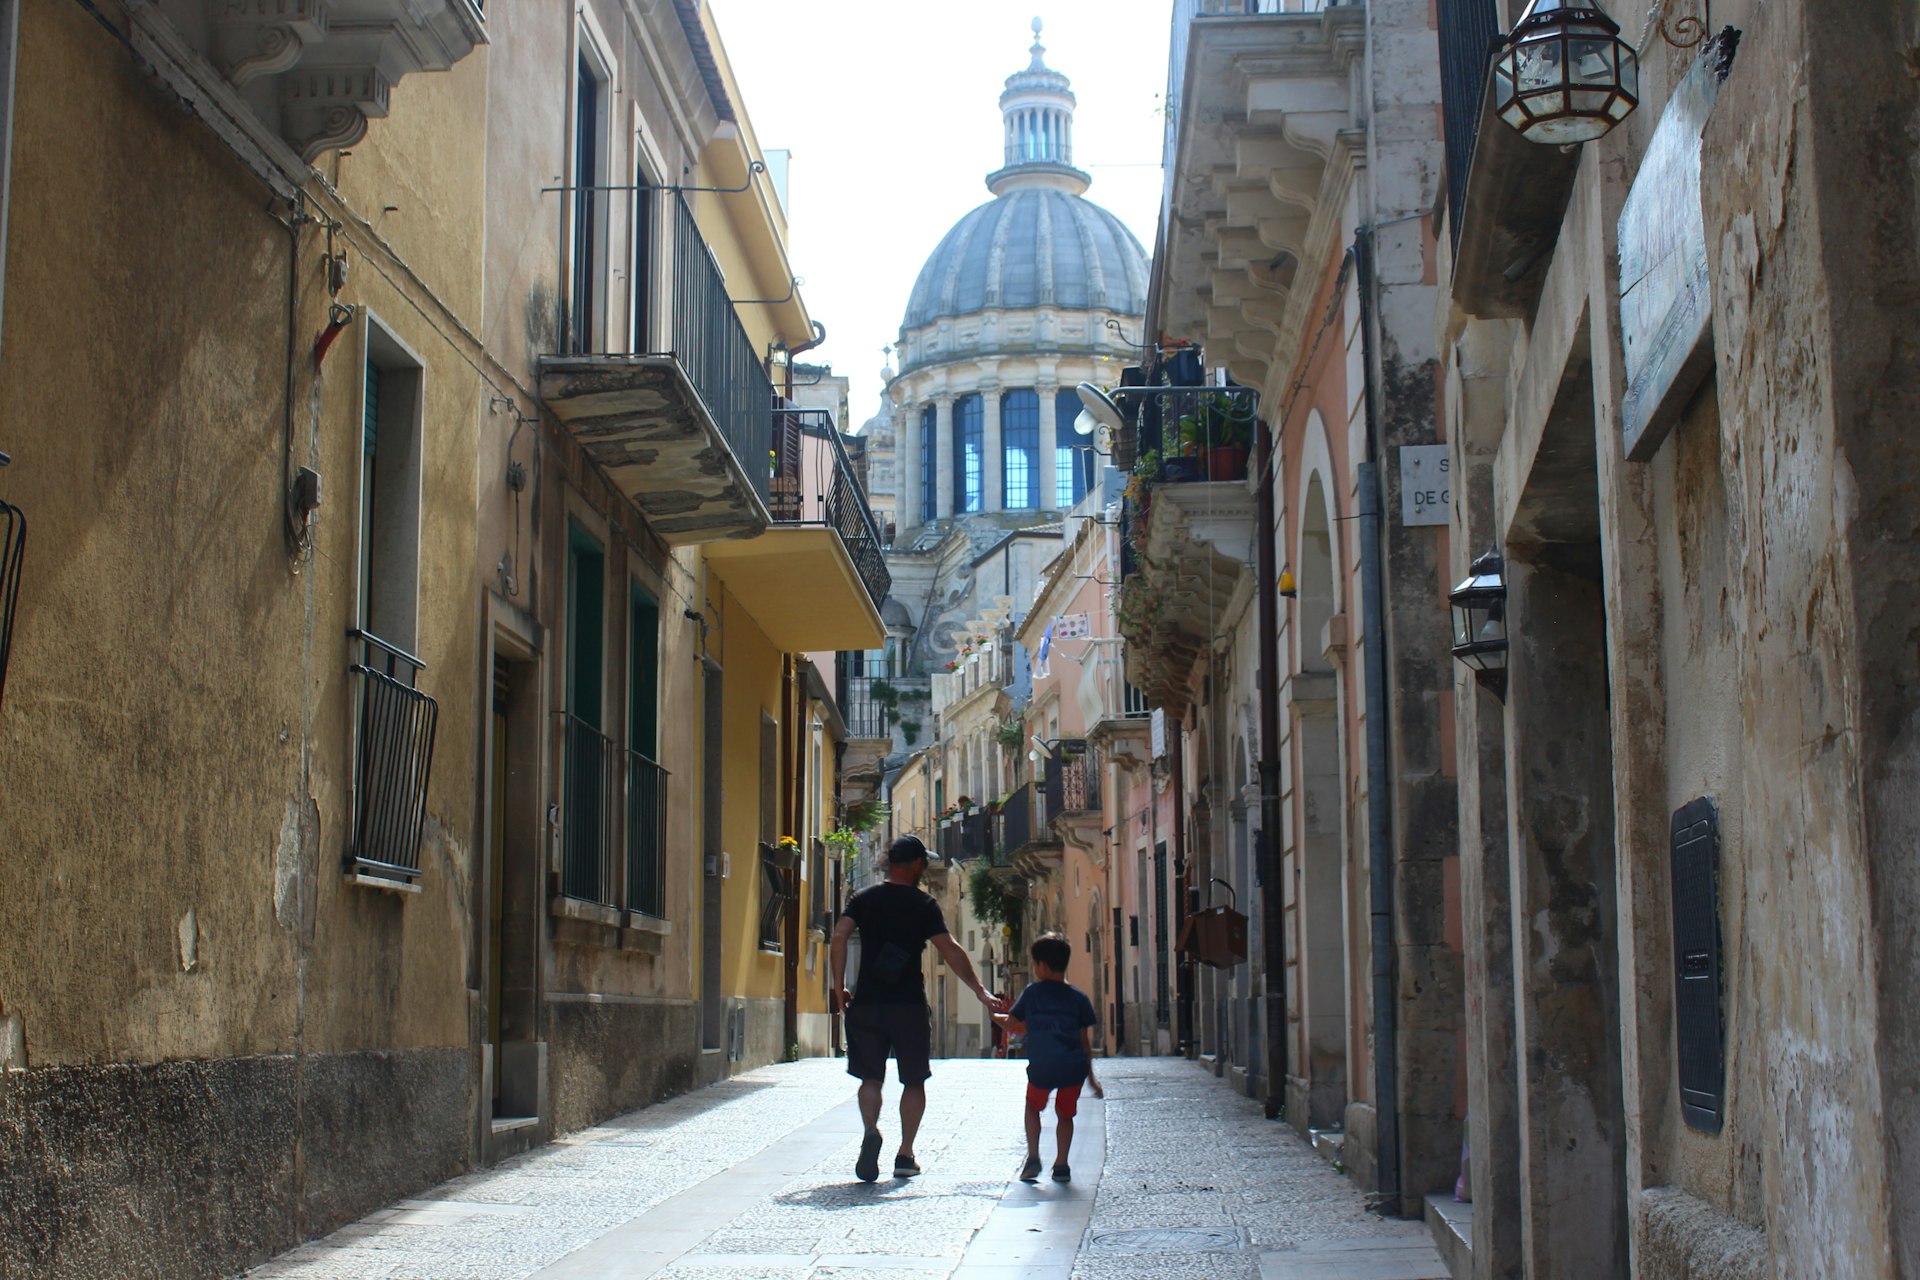 A father and son walk down a historic laneway in Ragusa, Sicily, with the dome of the Duomo di San Giorgio visible about the rooftops